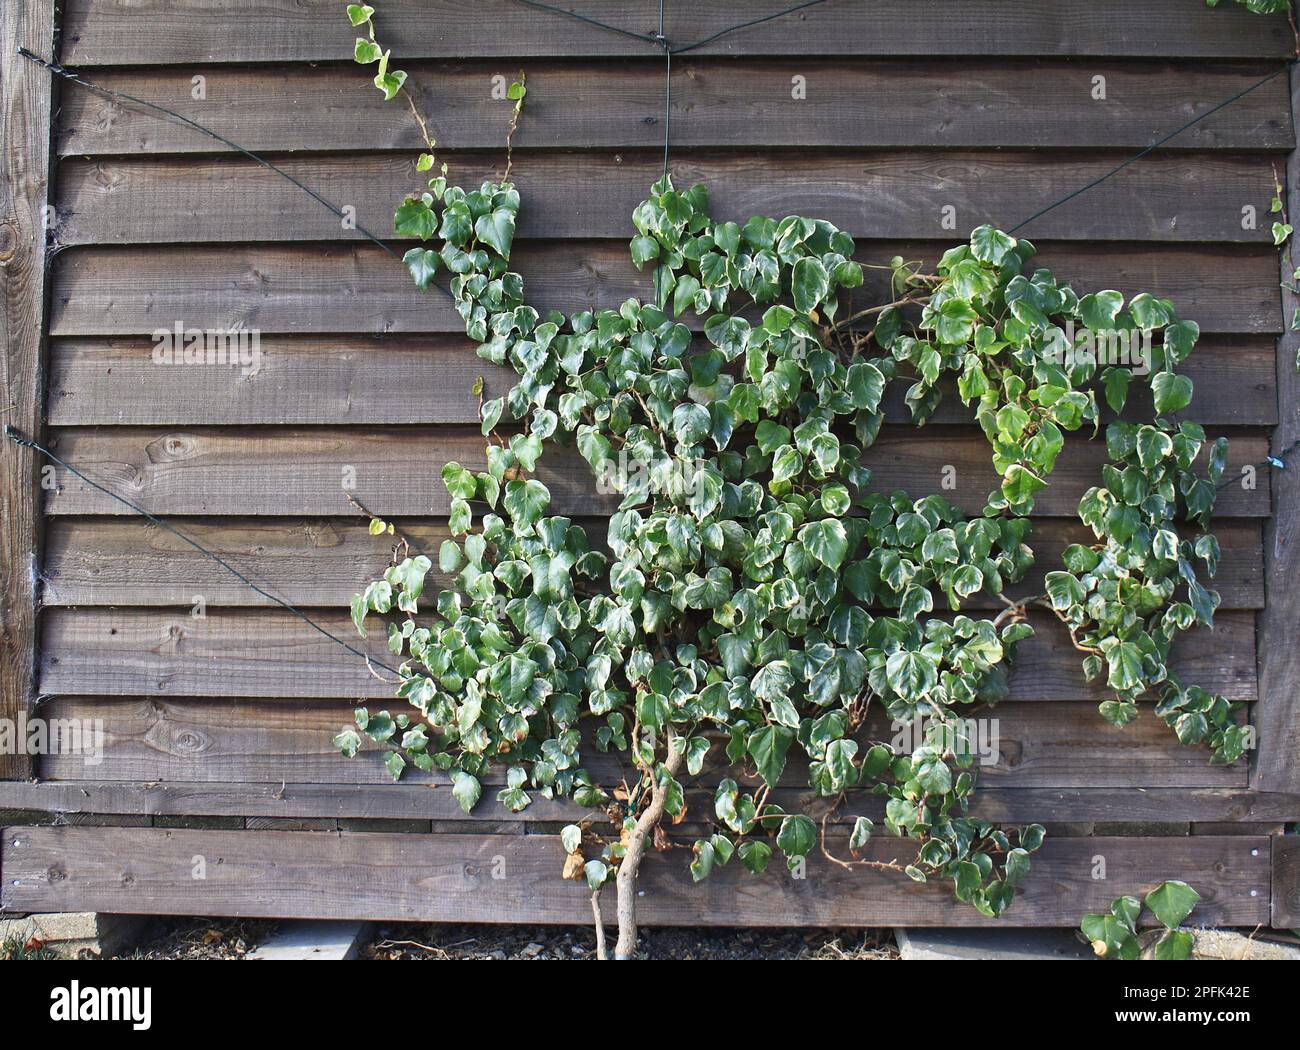 Common ivy (Hedera Helix) with variegated leaves, trained on wire supports in the garden shed, Bacton, Suffolk, England, United Kingdom Stock Photo